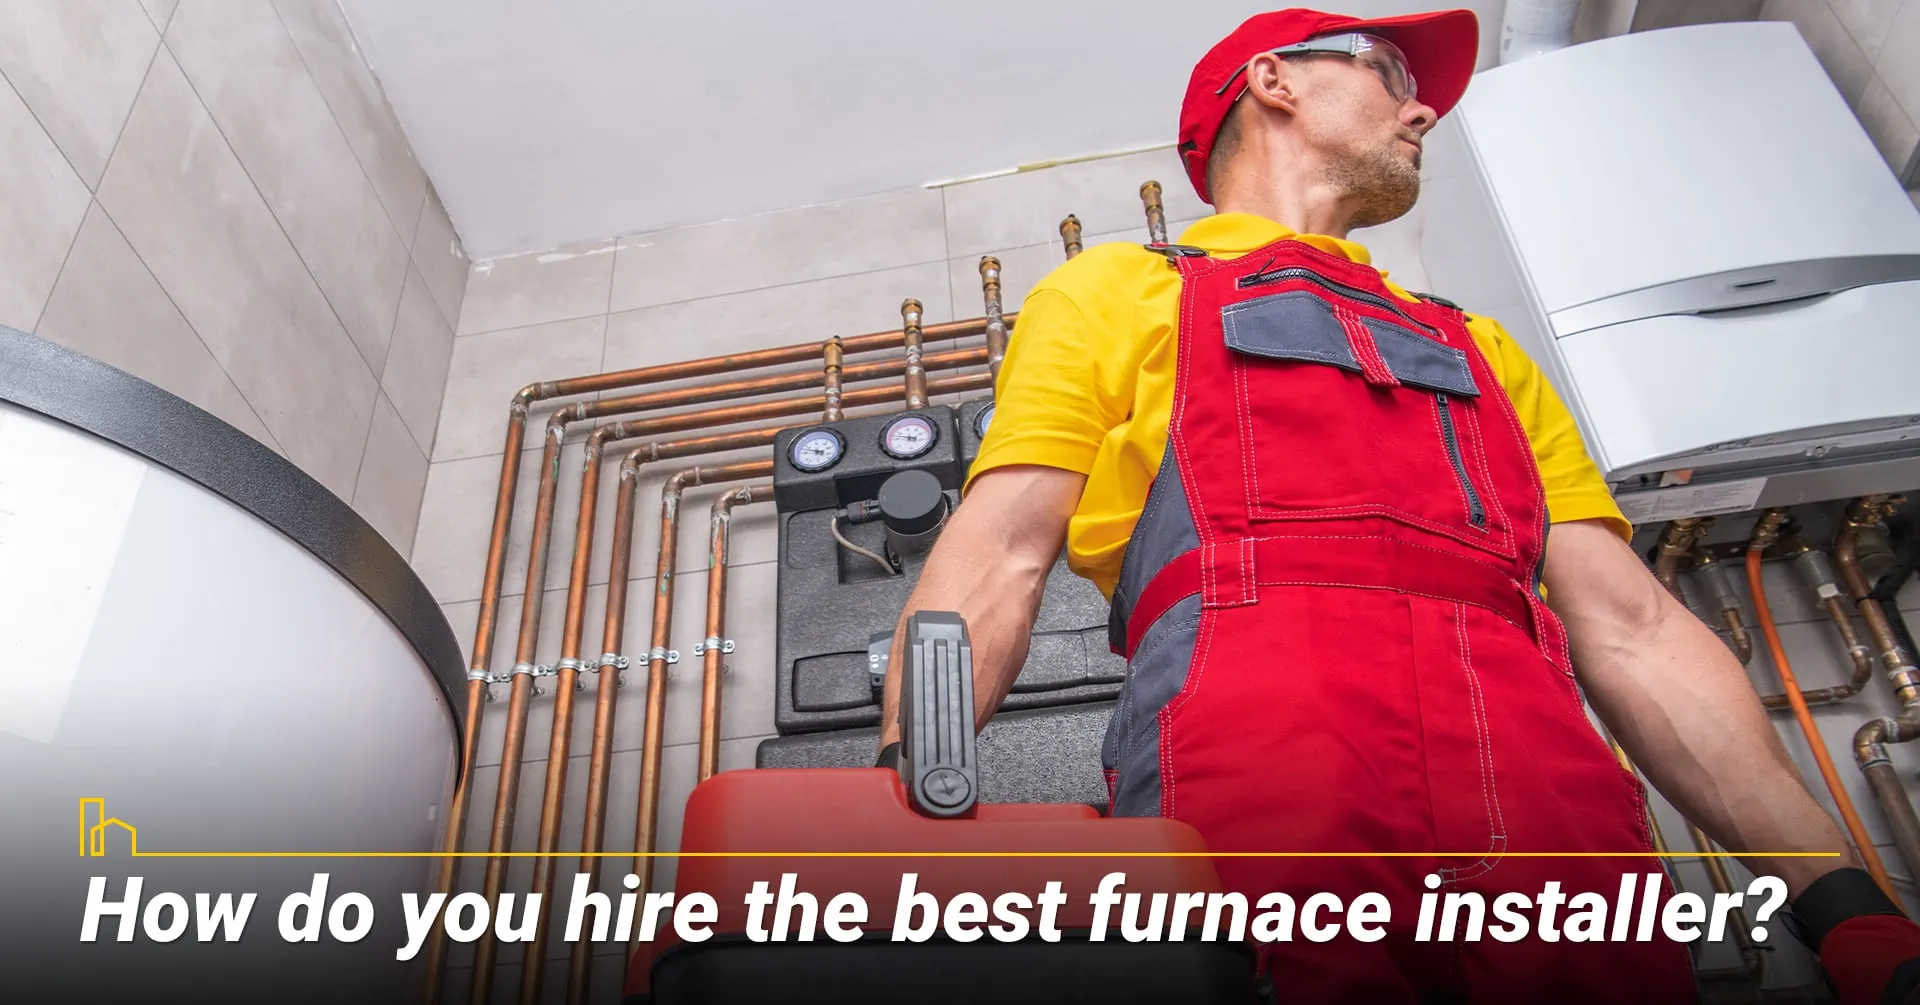 4. How do you hire the best furnace installer?